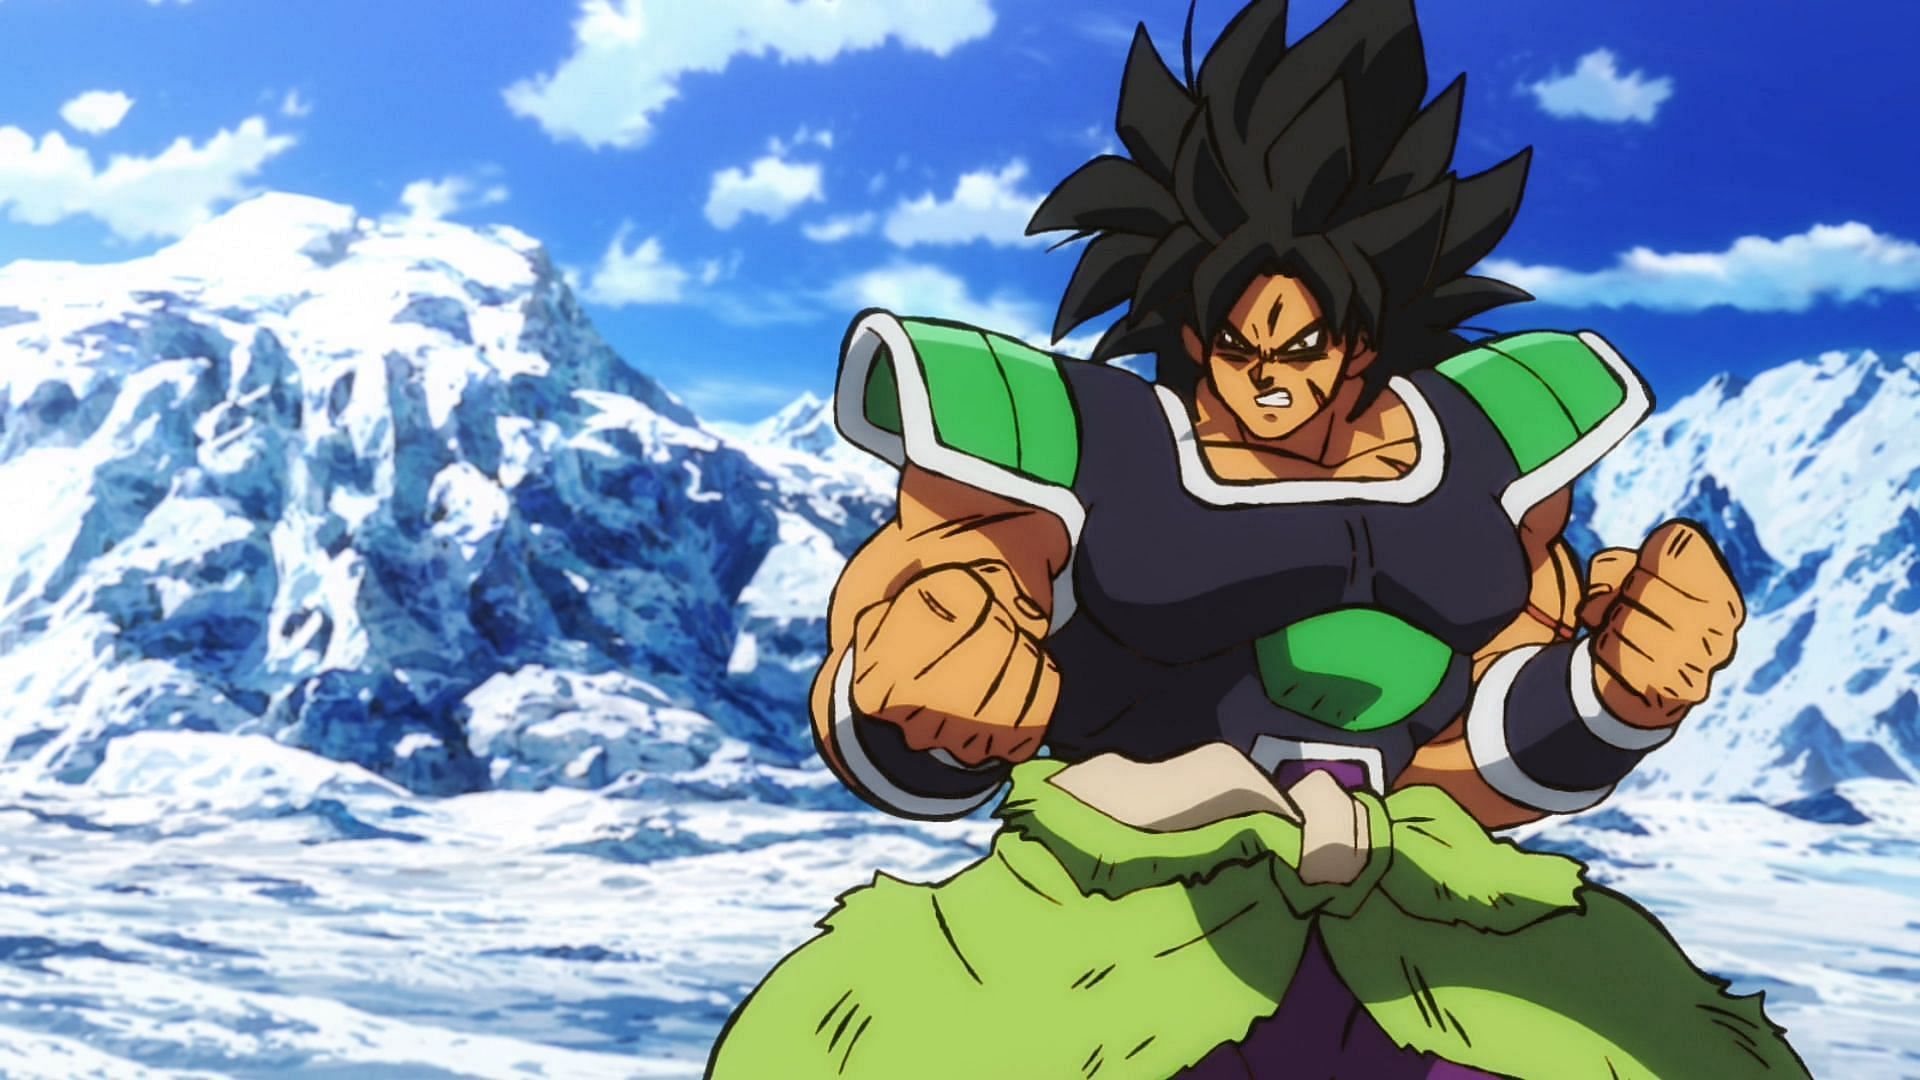 Broly from Dragon Ball Super Broly (Image by Toei Animation)